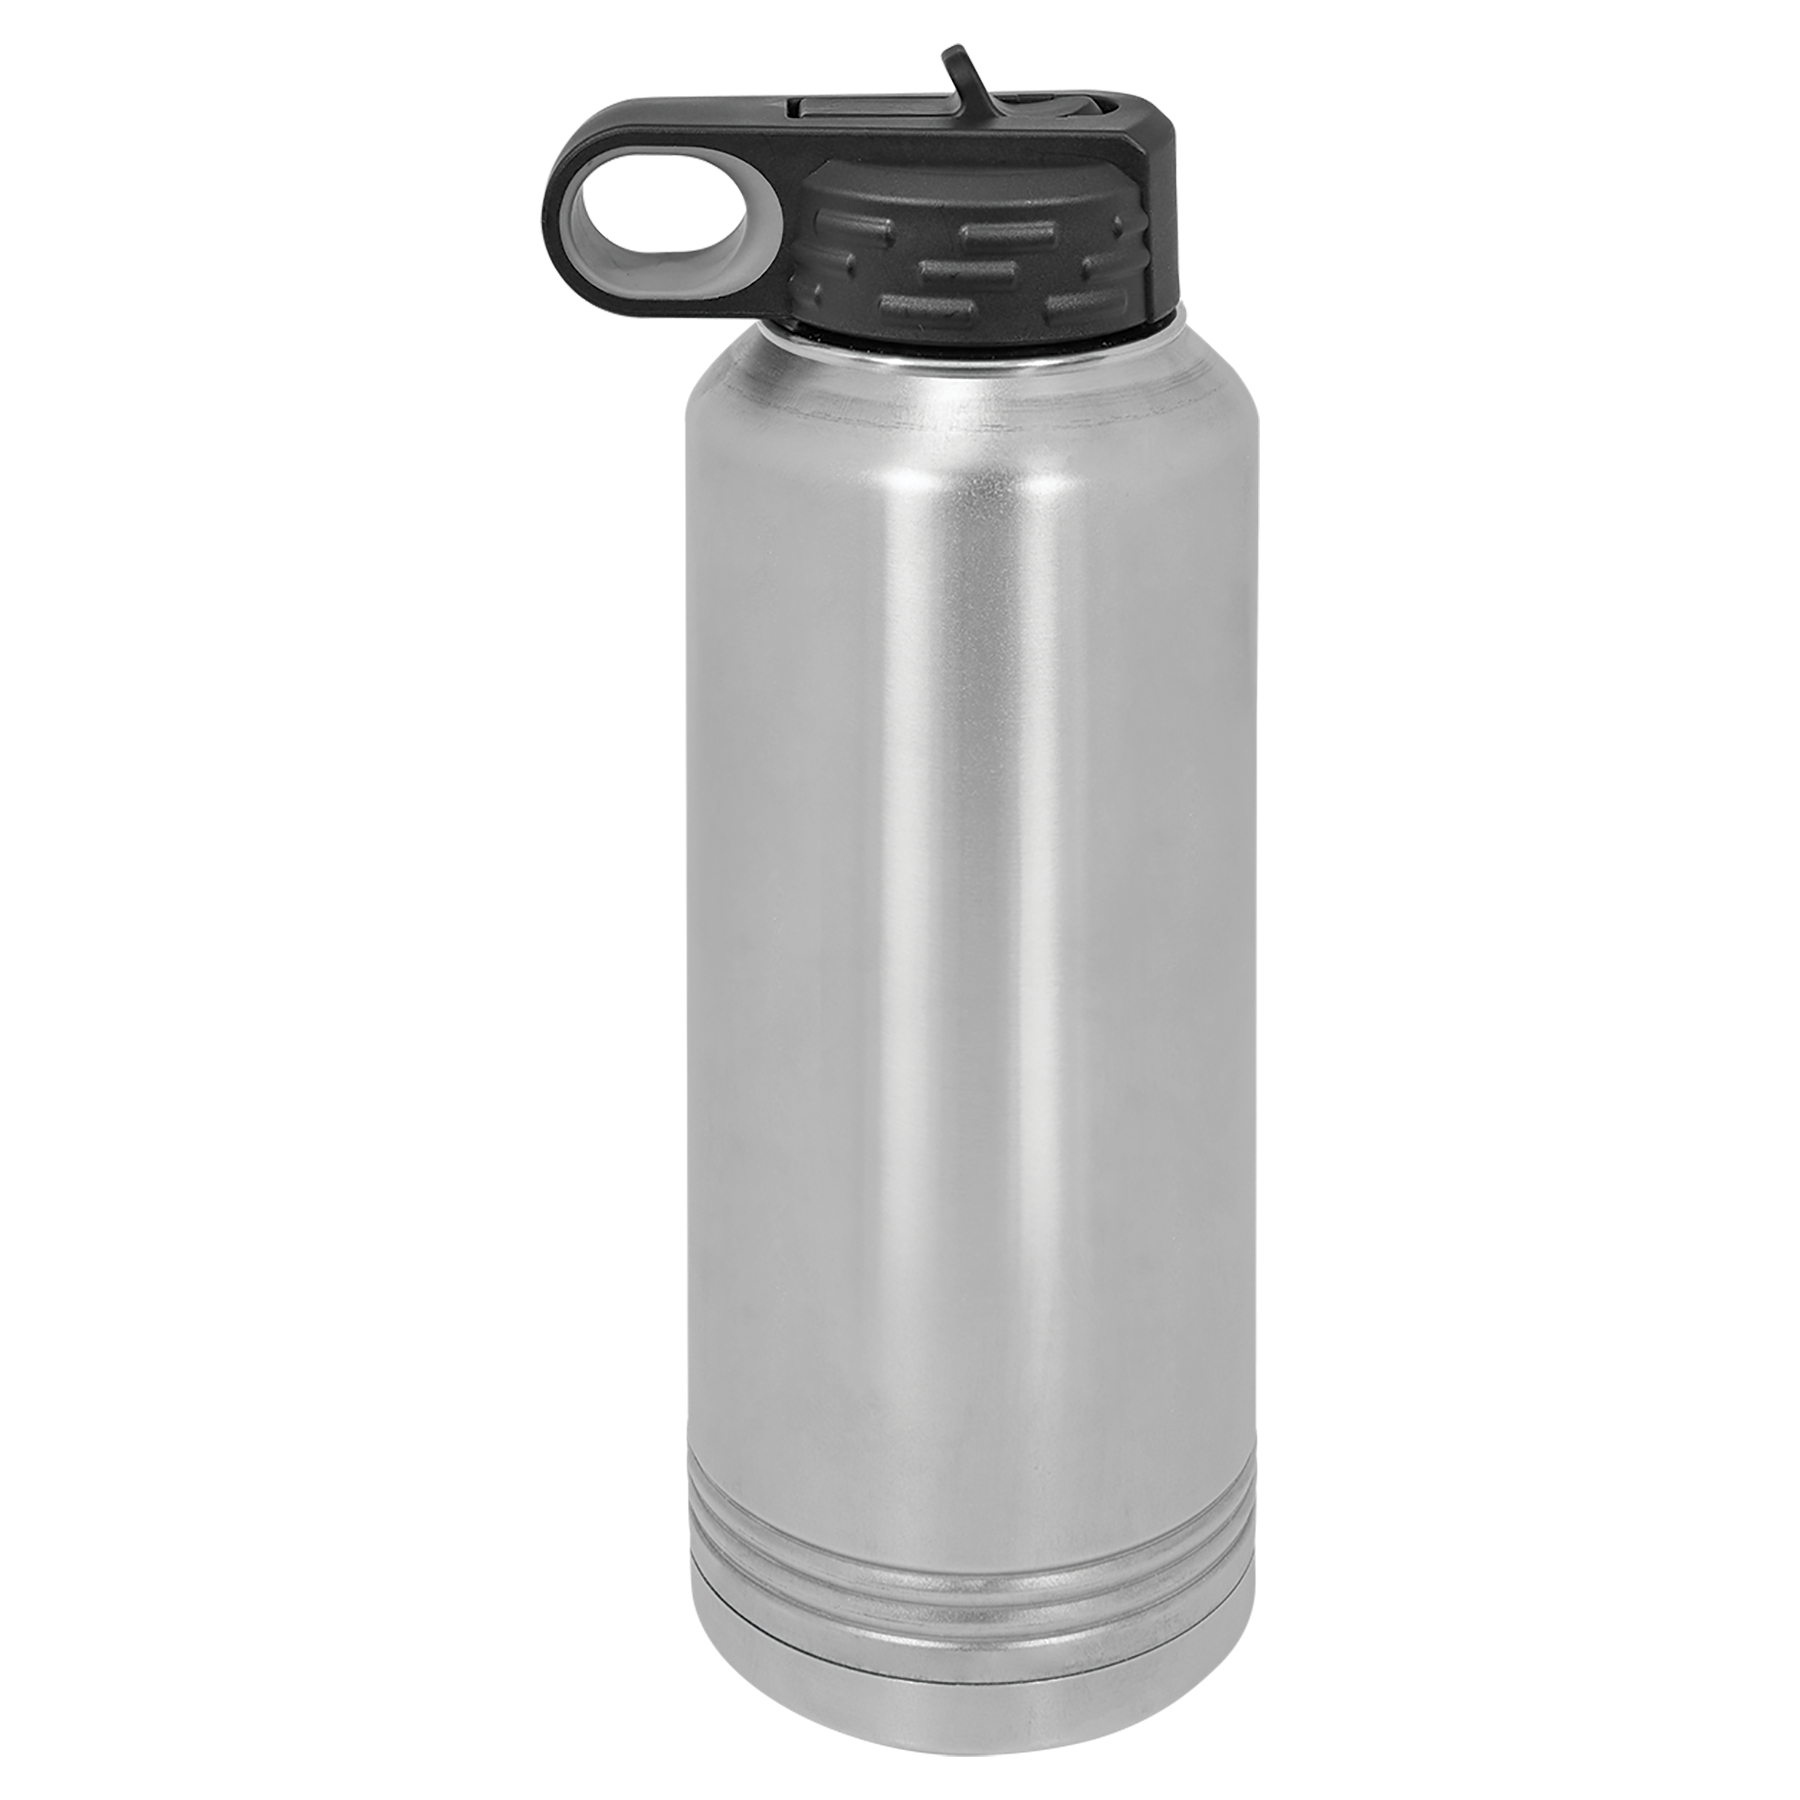 Stainless Steel 40oz Water Bottle -One Free Engraving -Double-wall Vacuum Insulated -Made from 18/8 Gauge Stainless Steel (Type 304 Food Grade) -Lid is BPA Free (Hand Wash Only) -Not recommended for Dishwasher -Works with Cold and Hot Drinks -18 Color Options -Perfect for Personalized Gifts, Awards, Incentives, Swag & Fundraisers